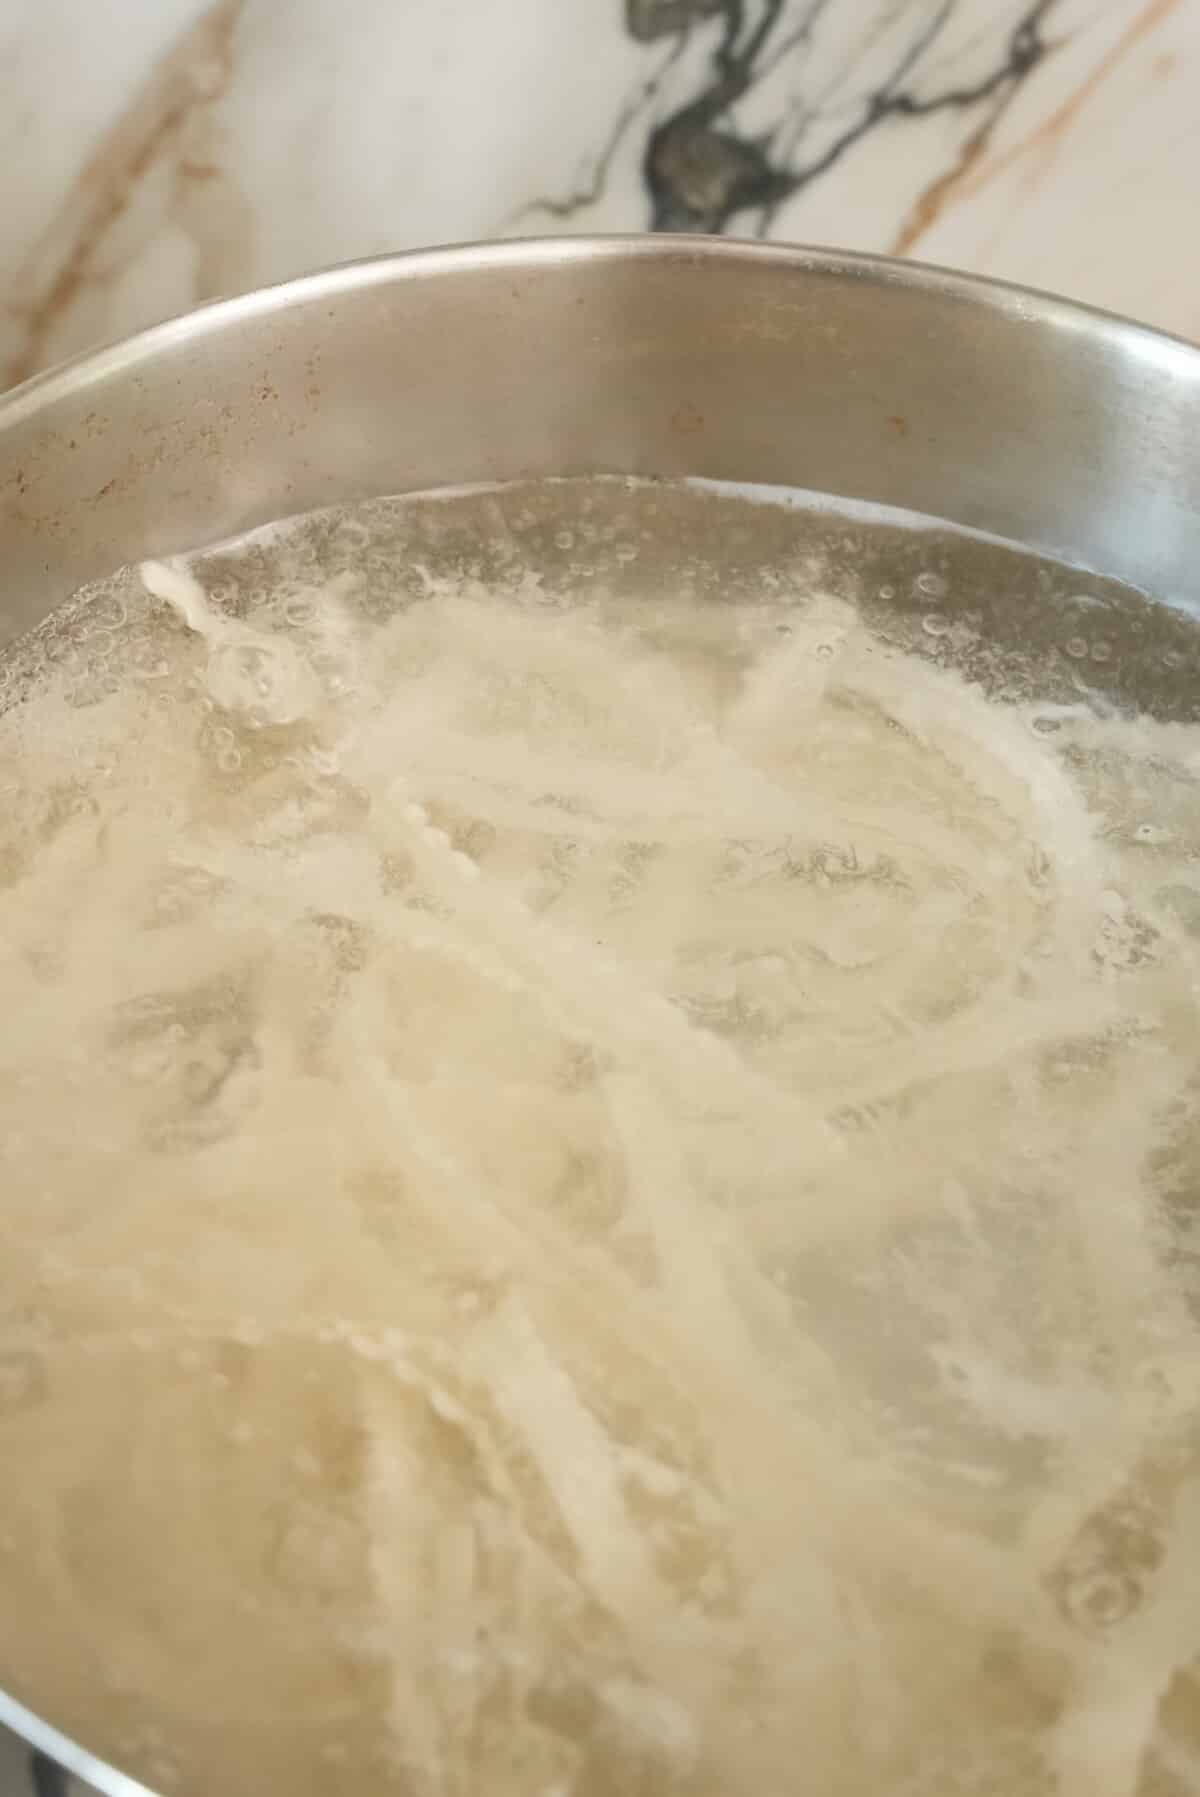 Noodles boiling in water.